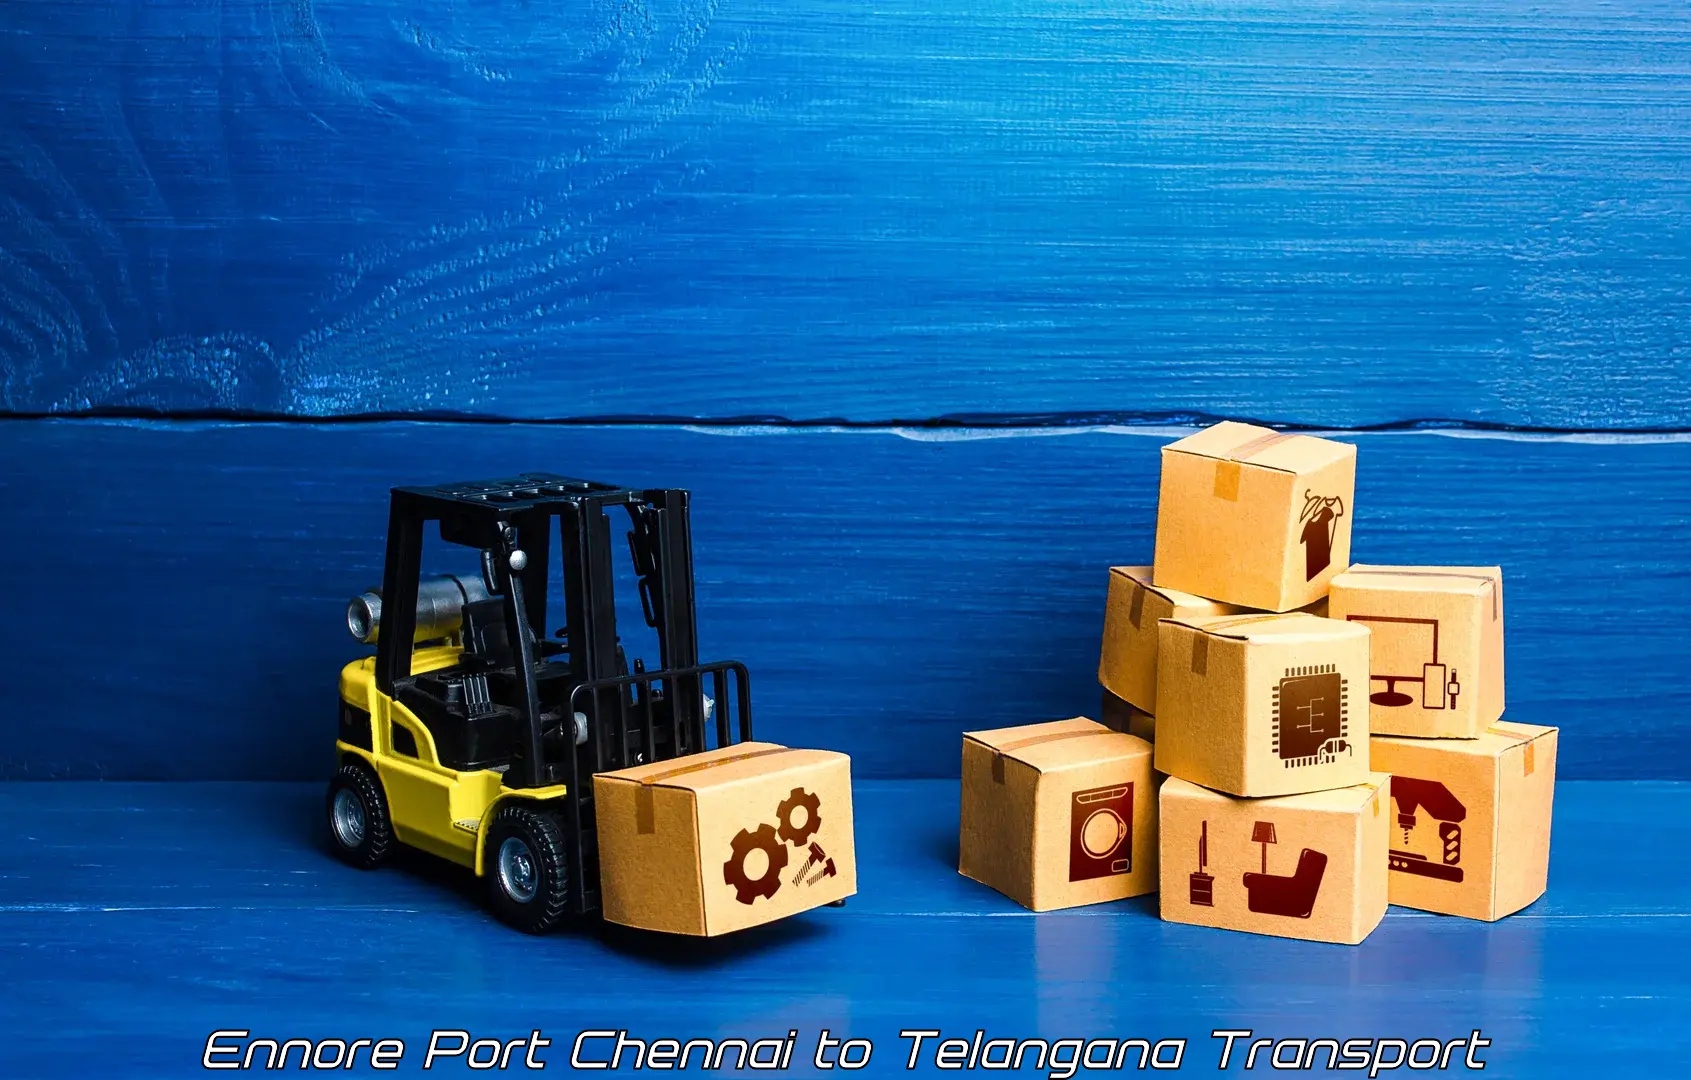 Container transport service Ennore Port Chennai to Mahabubabad